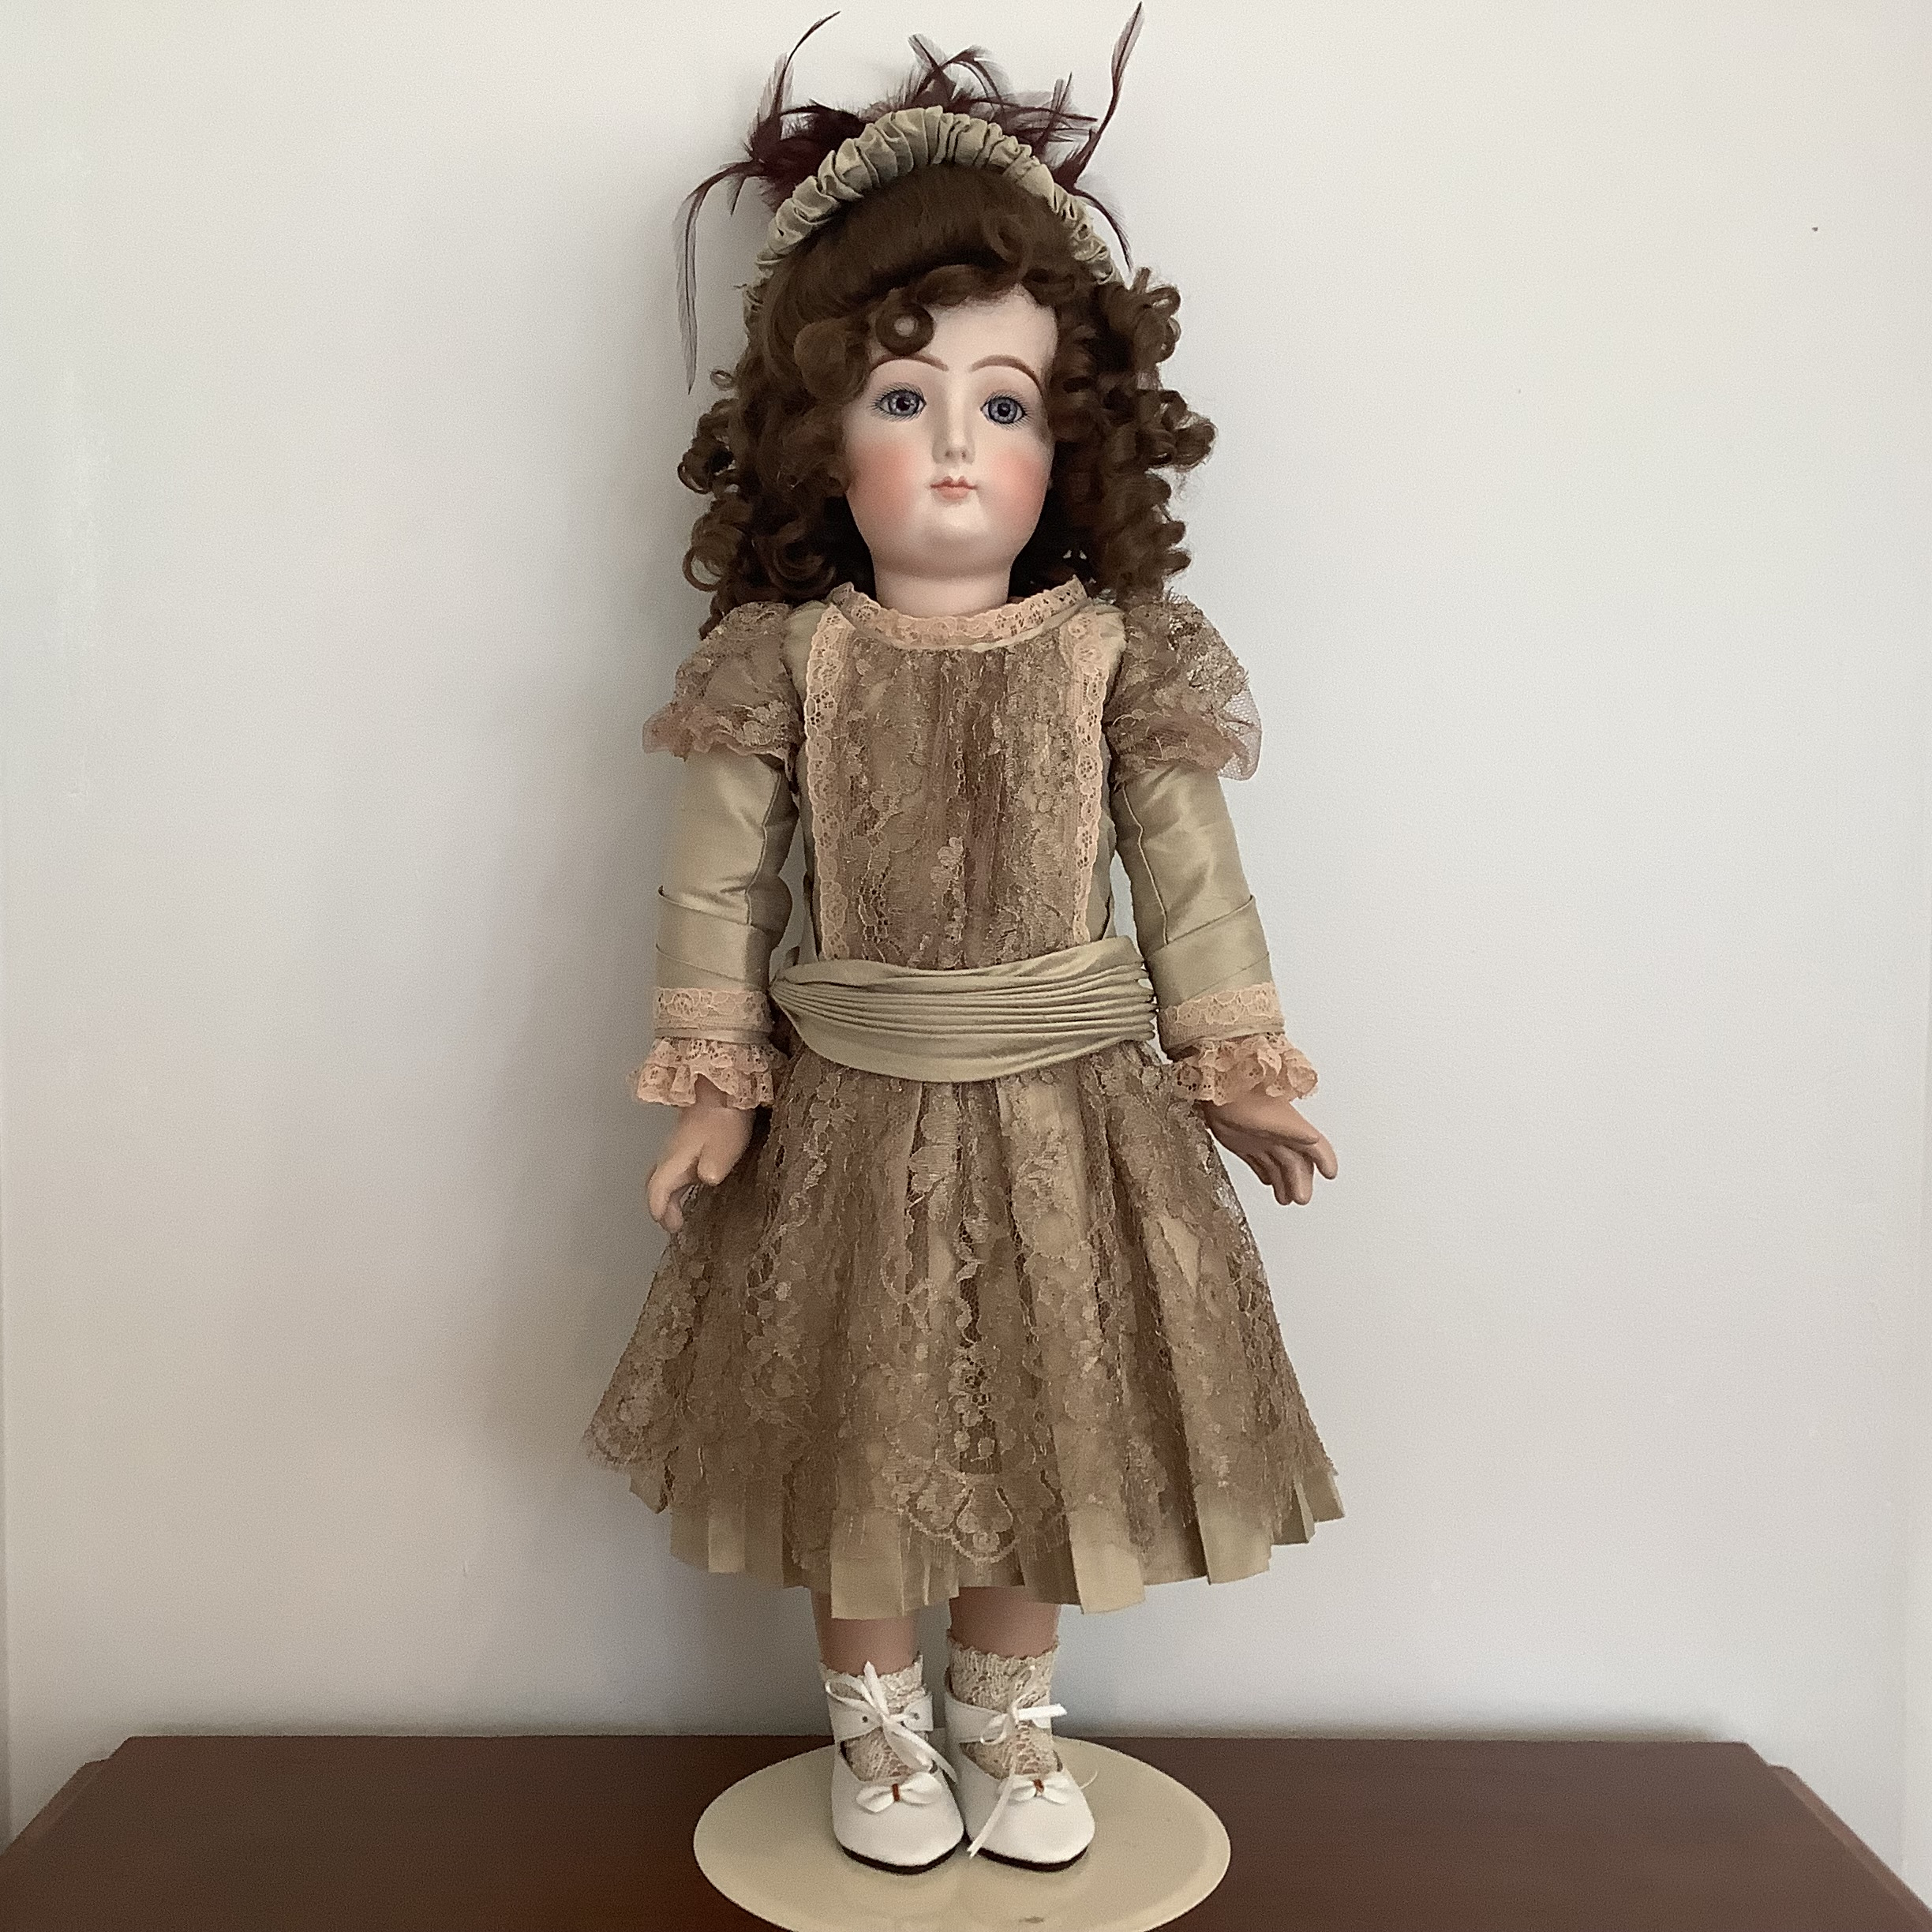 26-inch reproduction AT in taupe dress and matching velvet hat with dark brown feathers, front view